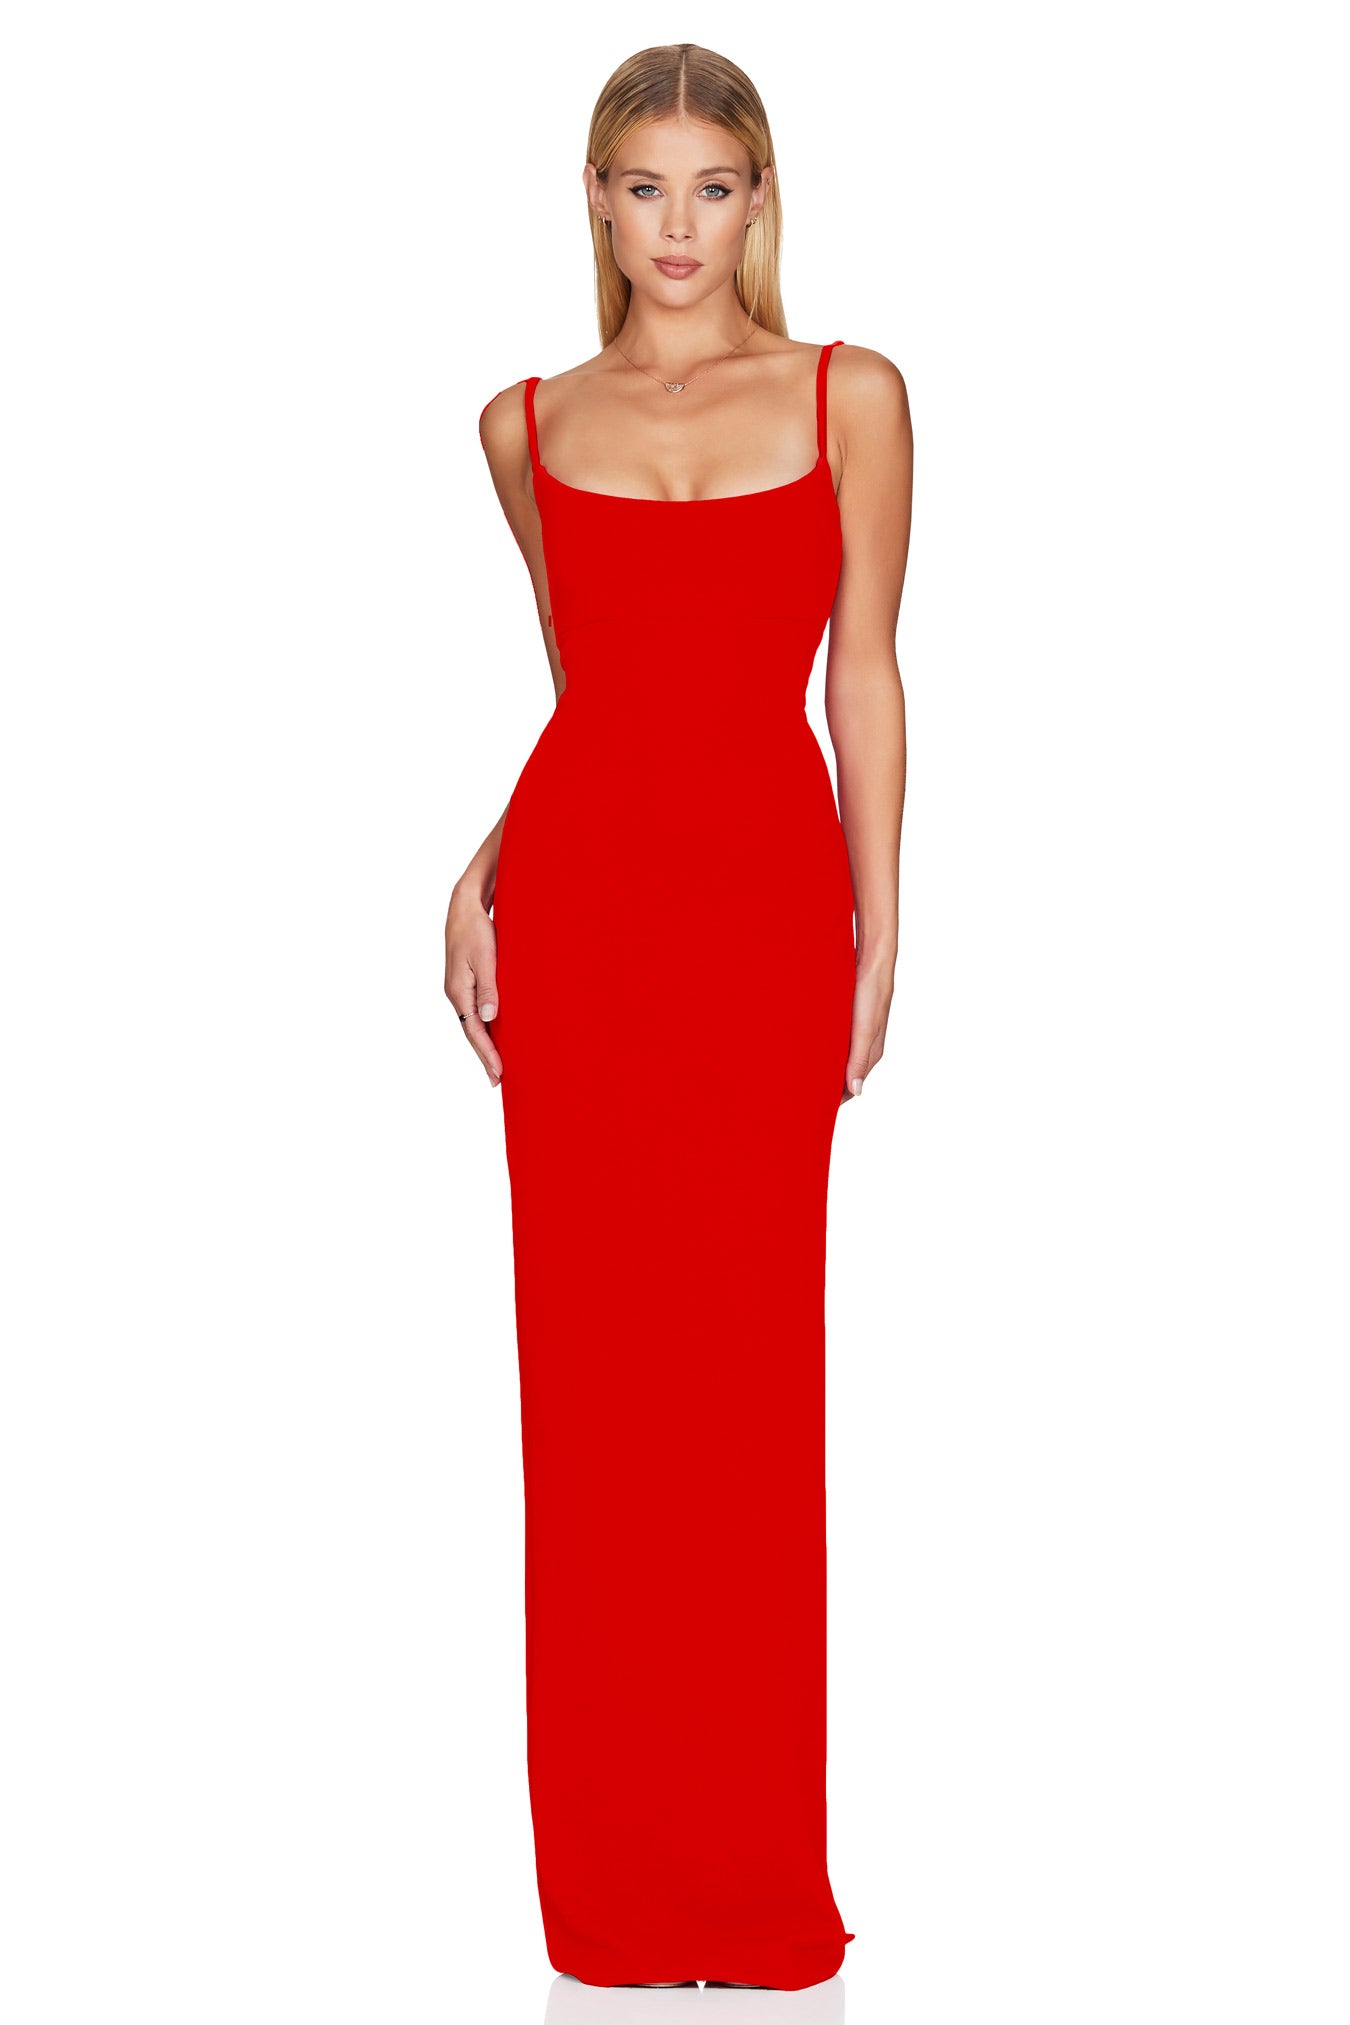 NOOKIE - Bailey Gown Cherry Red (10)